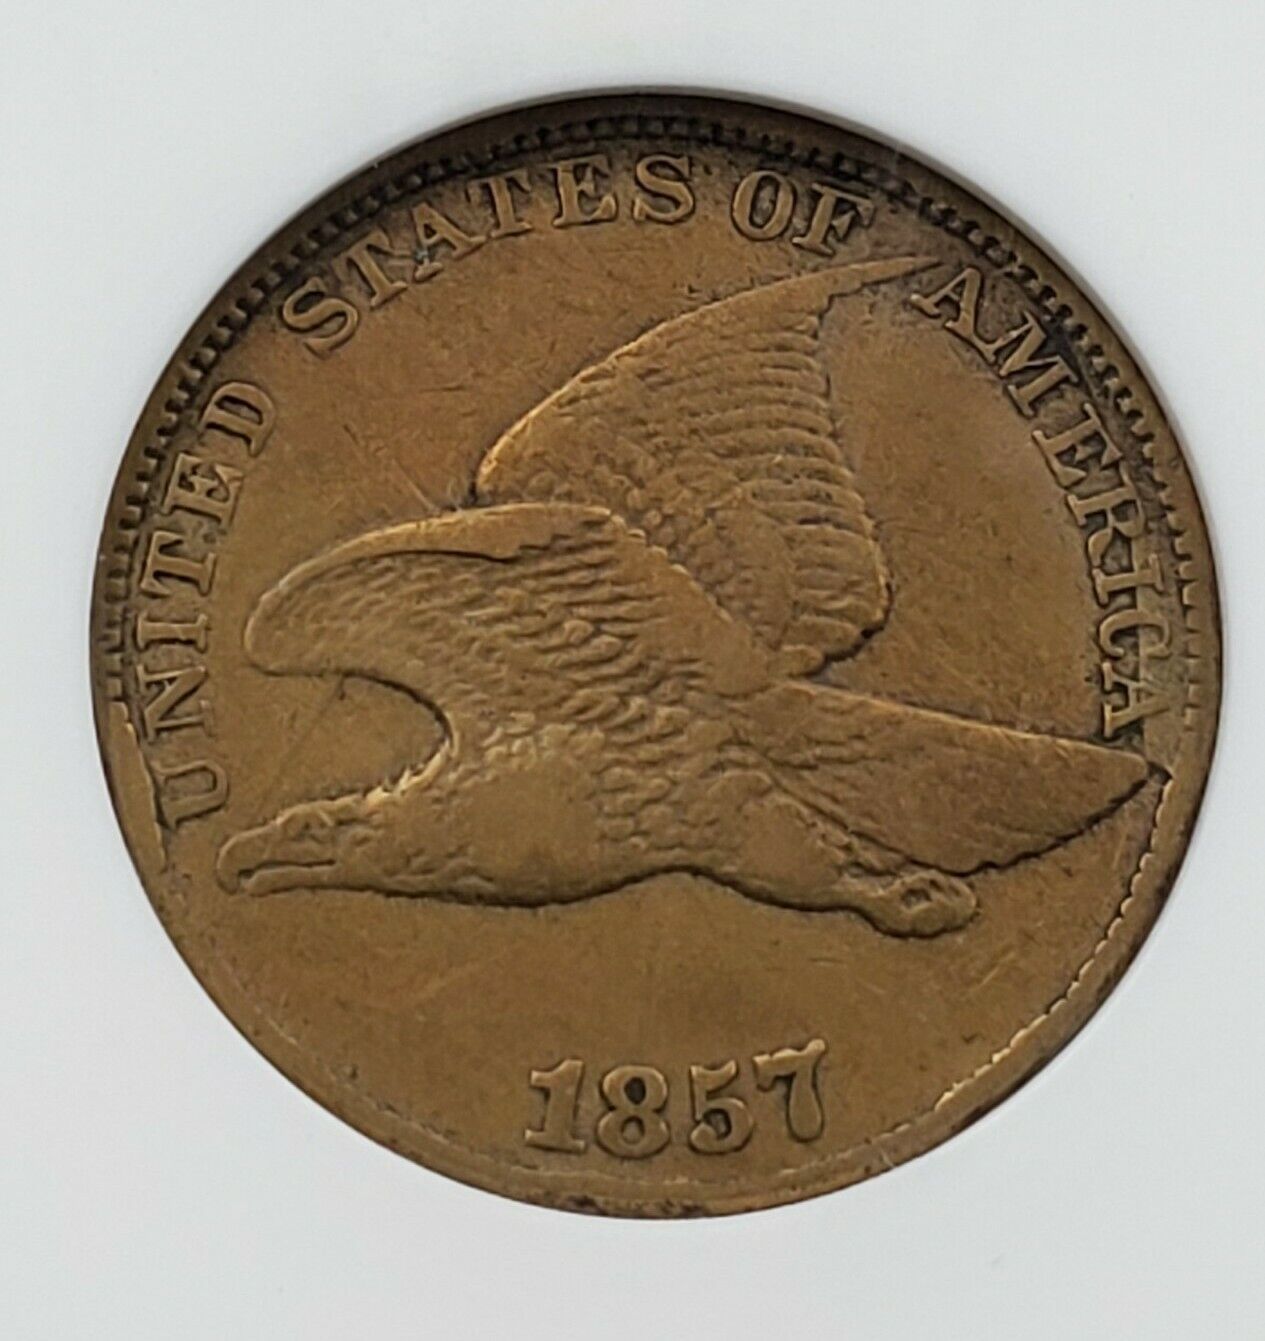 1857 Flying Eagle Cent Penny Error ANACS Clashed Dies FS-003 FS-402 VF Details